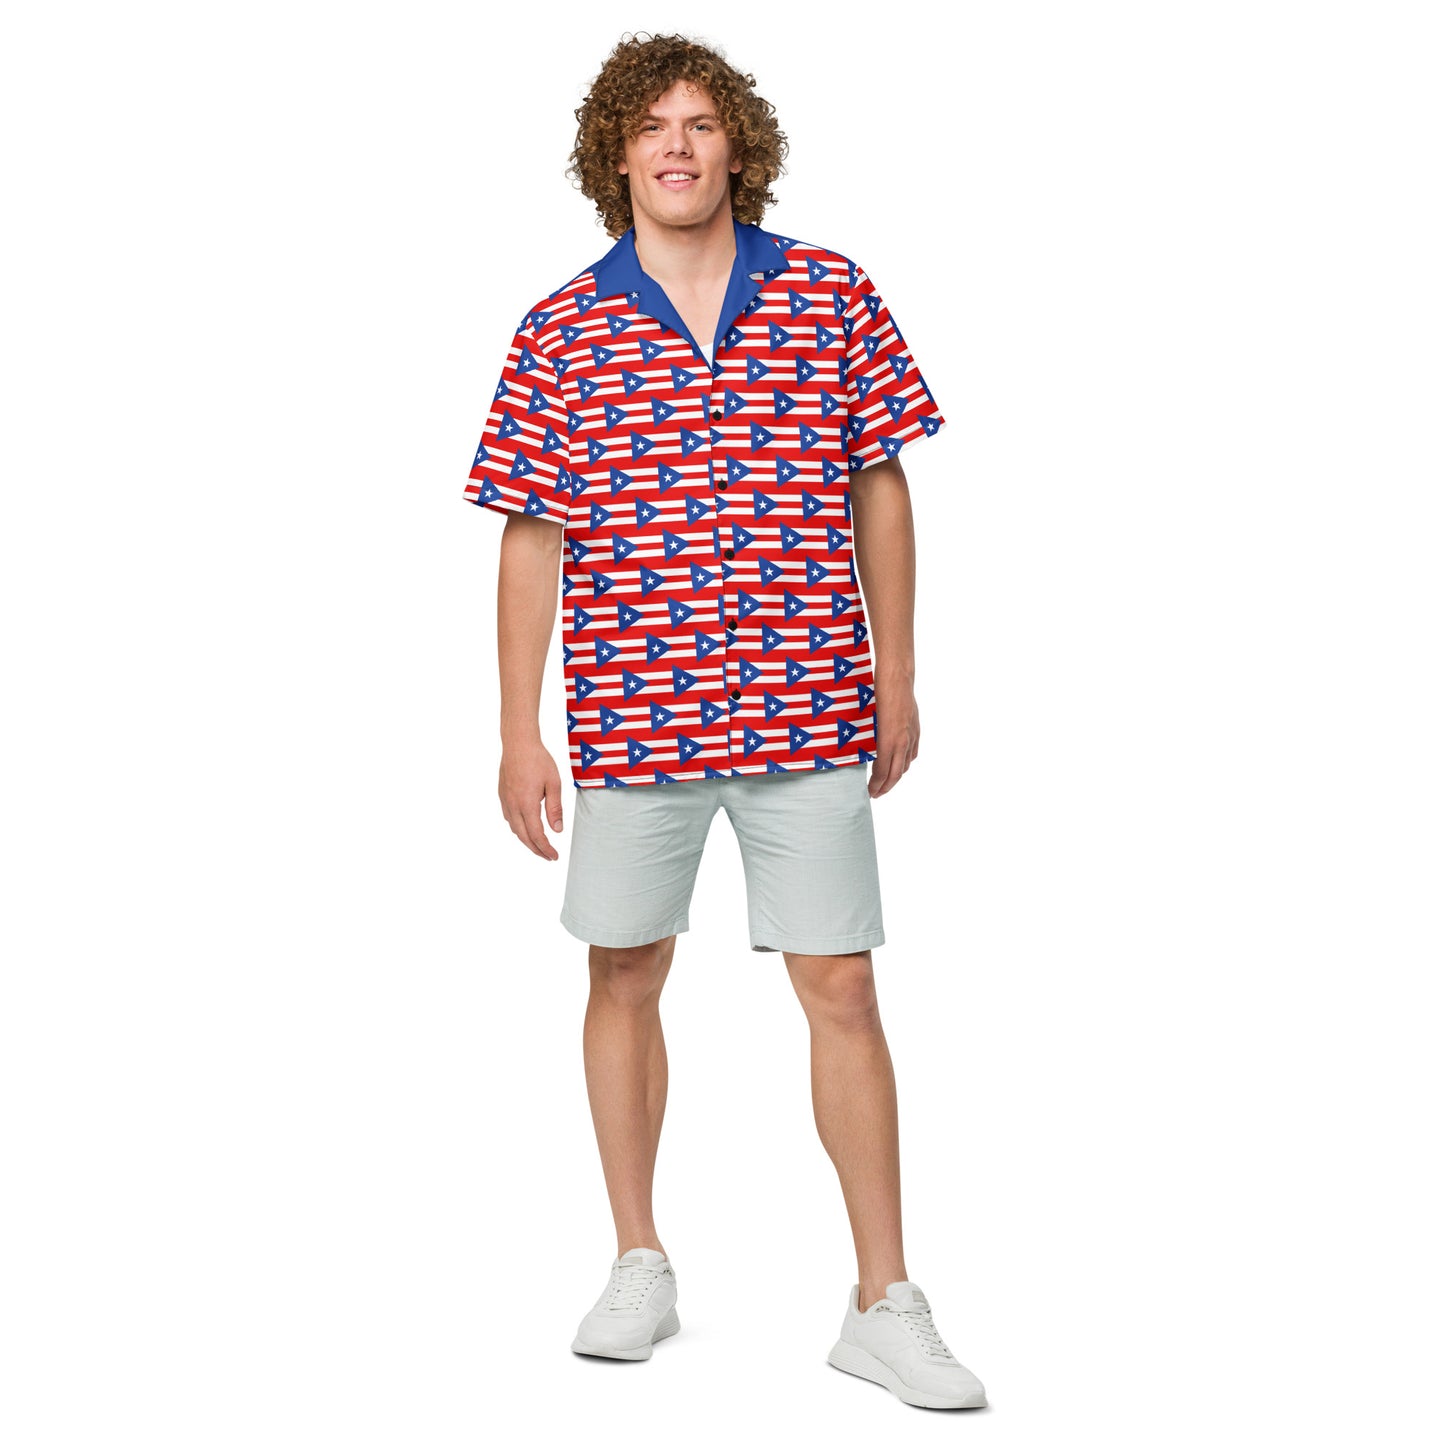 Puerto Rico Shirt With Buttons / Puerto Rican Flag Clothing